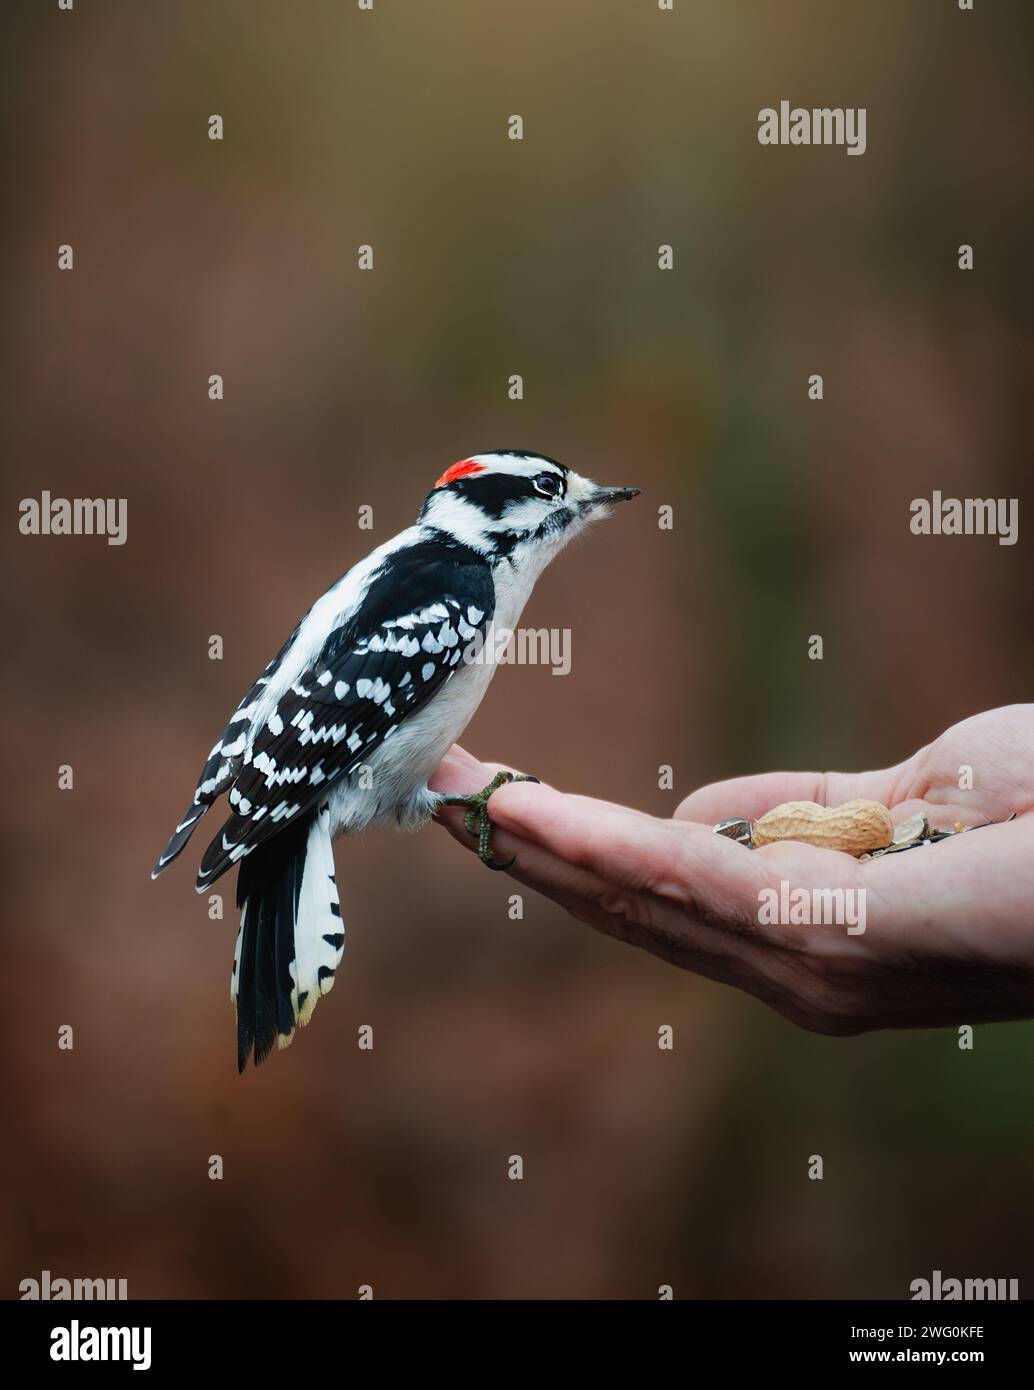 Downy woodpecker perched on hand holding seeds outside. Stock Photo